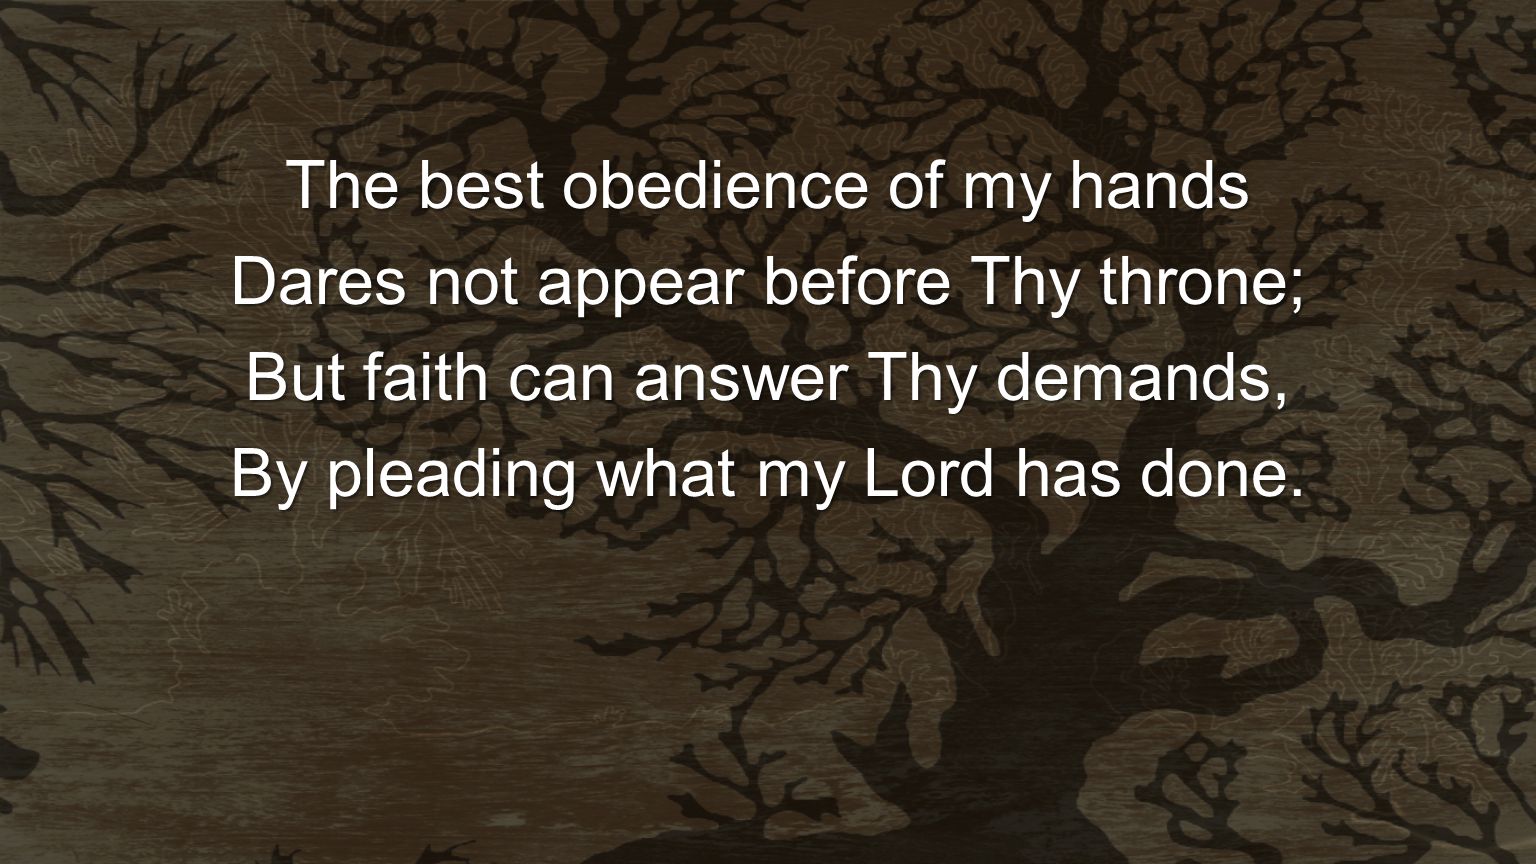 The best obedience of my hands Dares not appear before Thy throne;